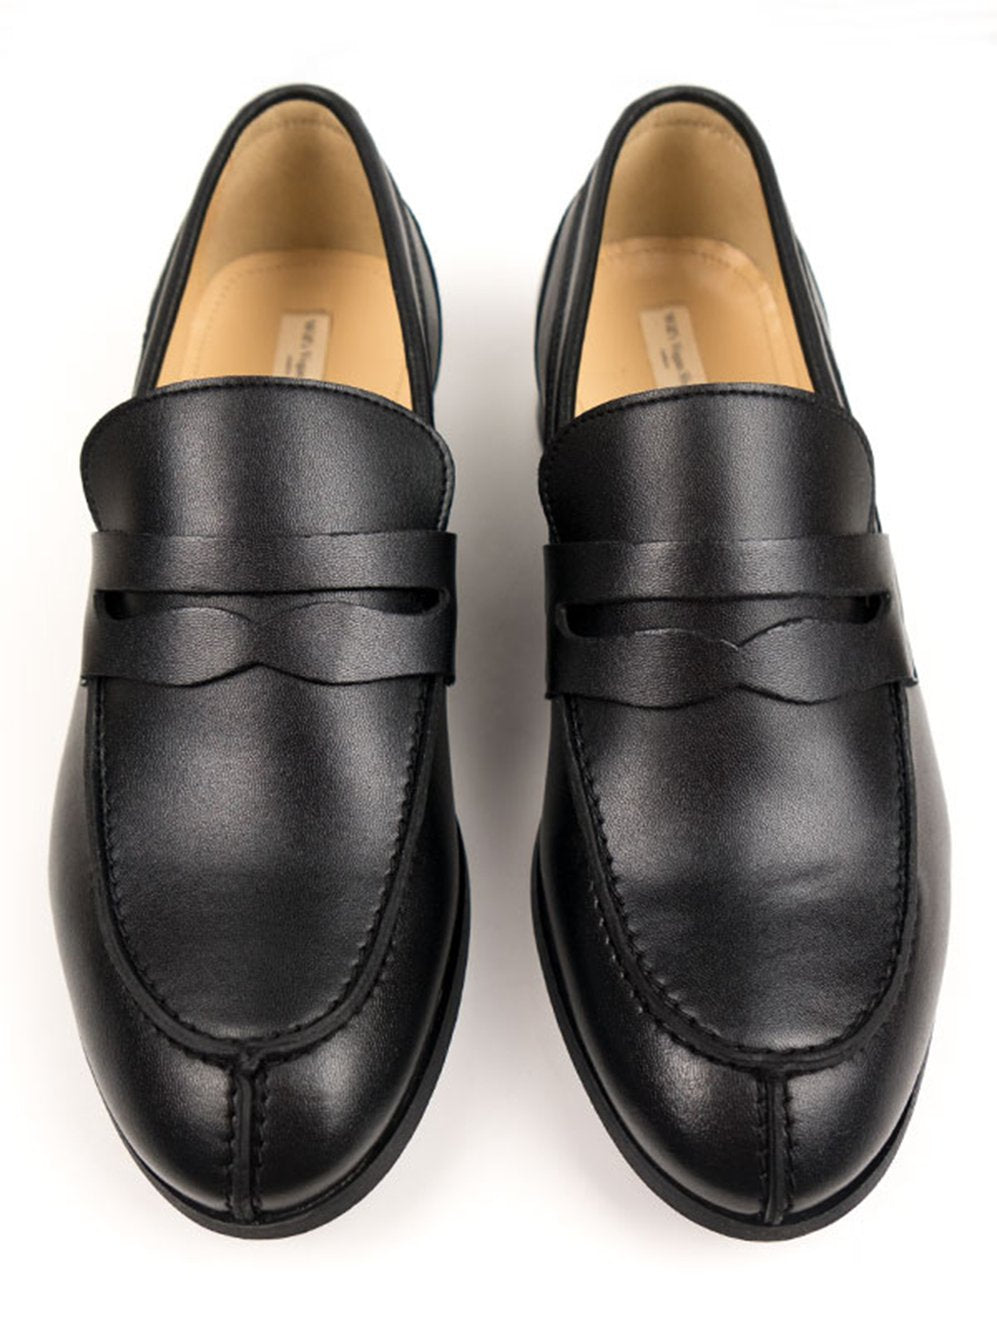 City Loafers - Black